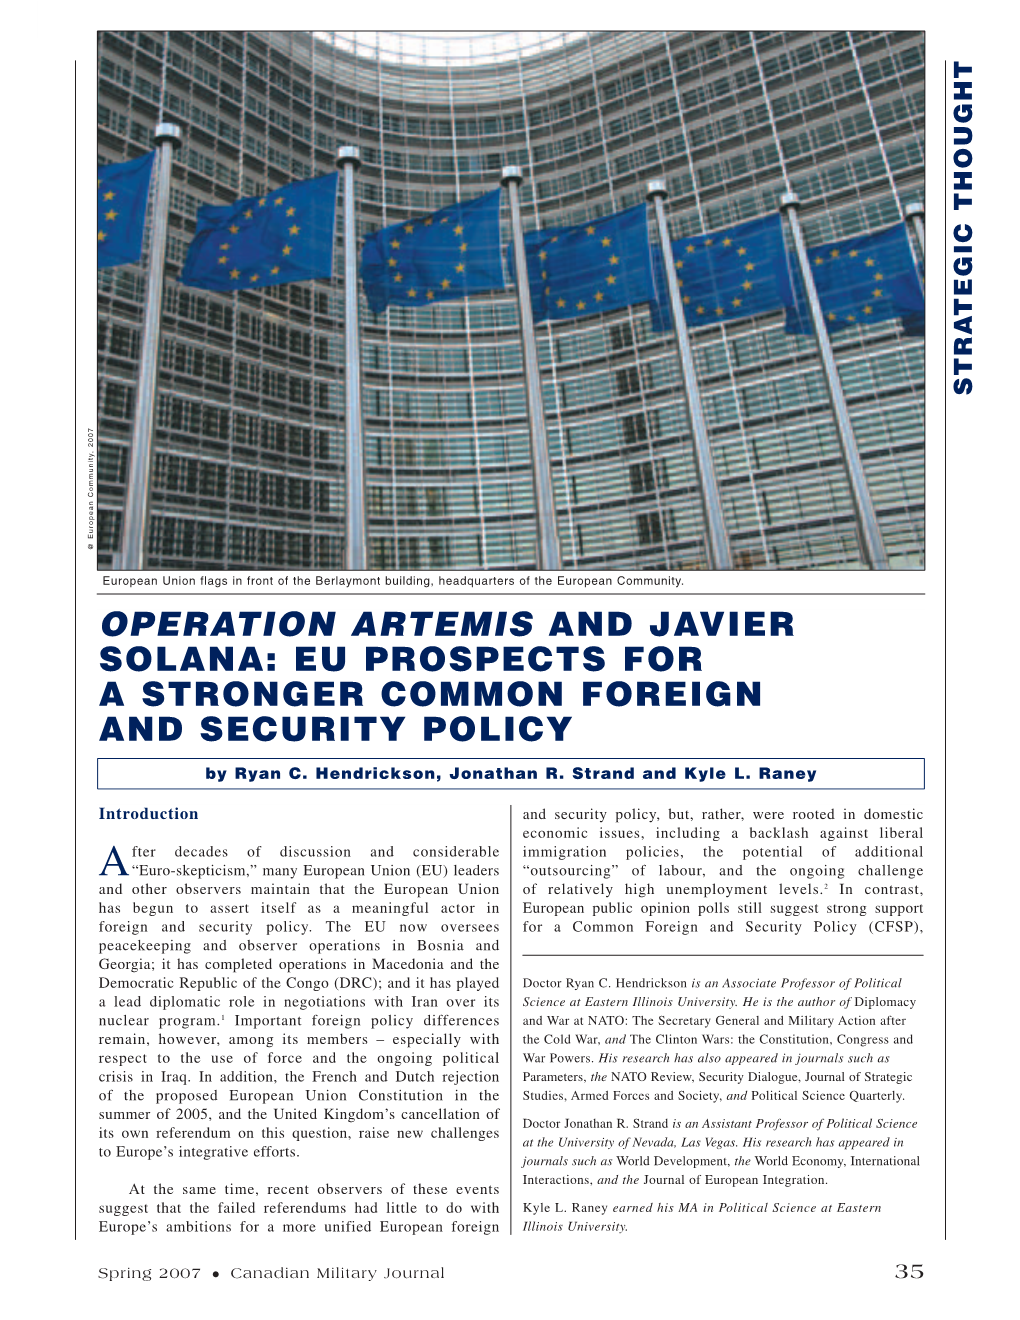 Operation Artemis and Javier Solana: Eu Prospects for a Stronger Common Foreign and Security Policy